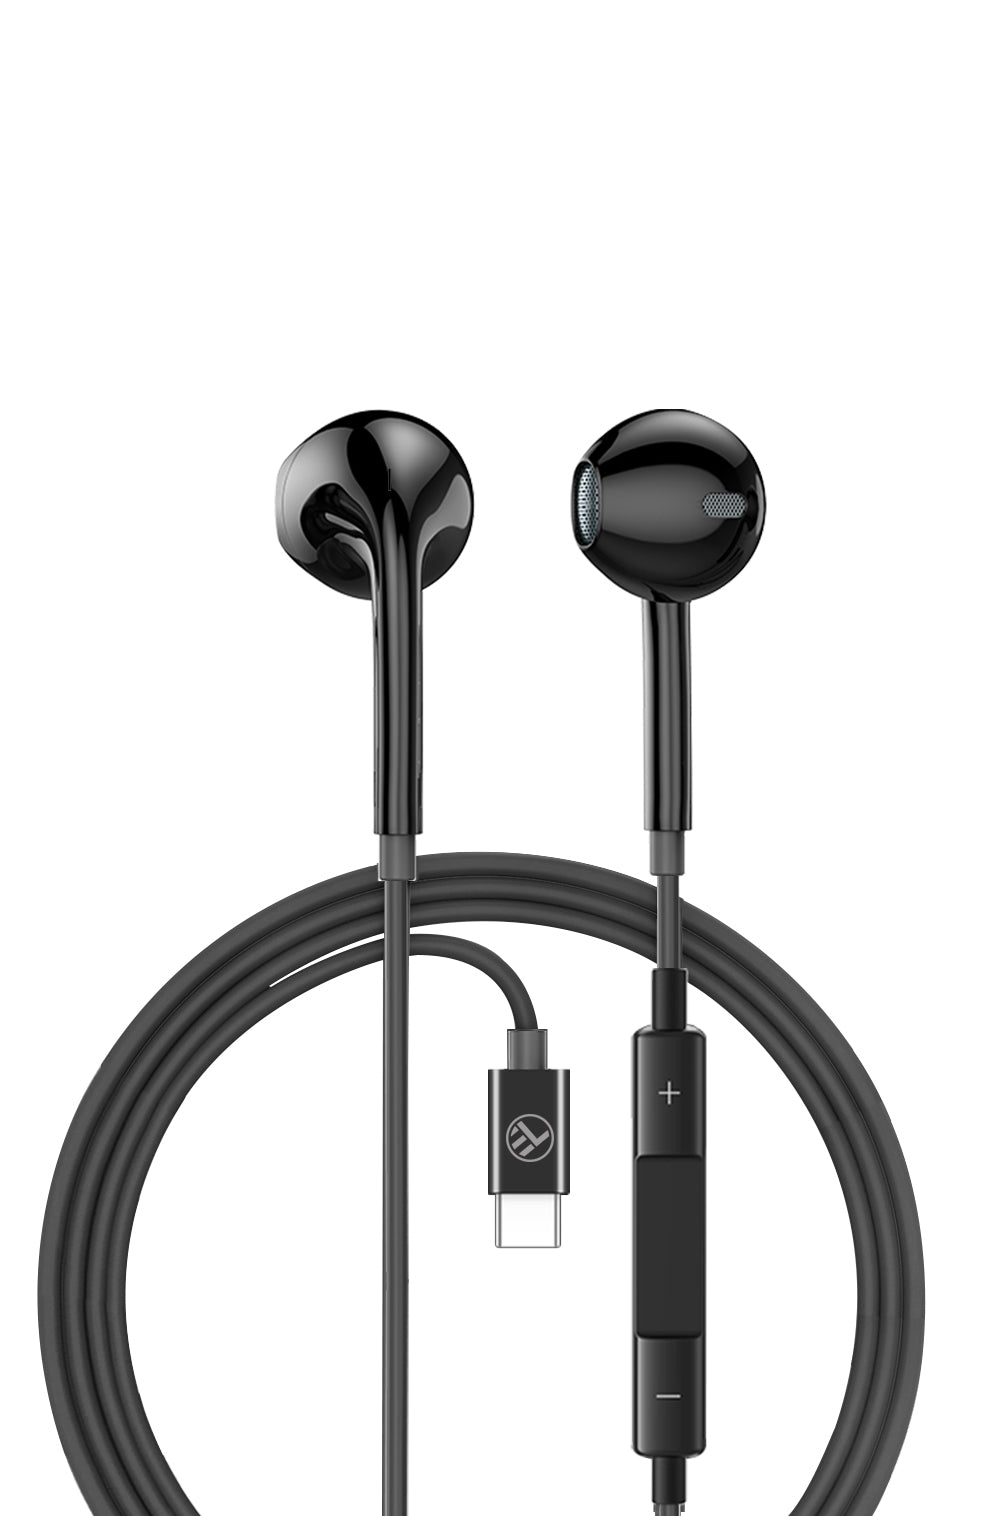 Tellur Basic Drill In-Ear Headphones with Type-C Connection, Black - Fashionable and Comfortable